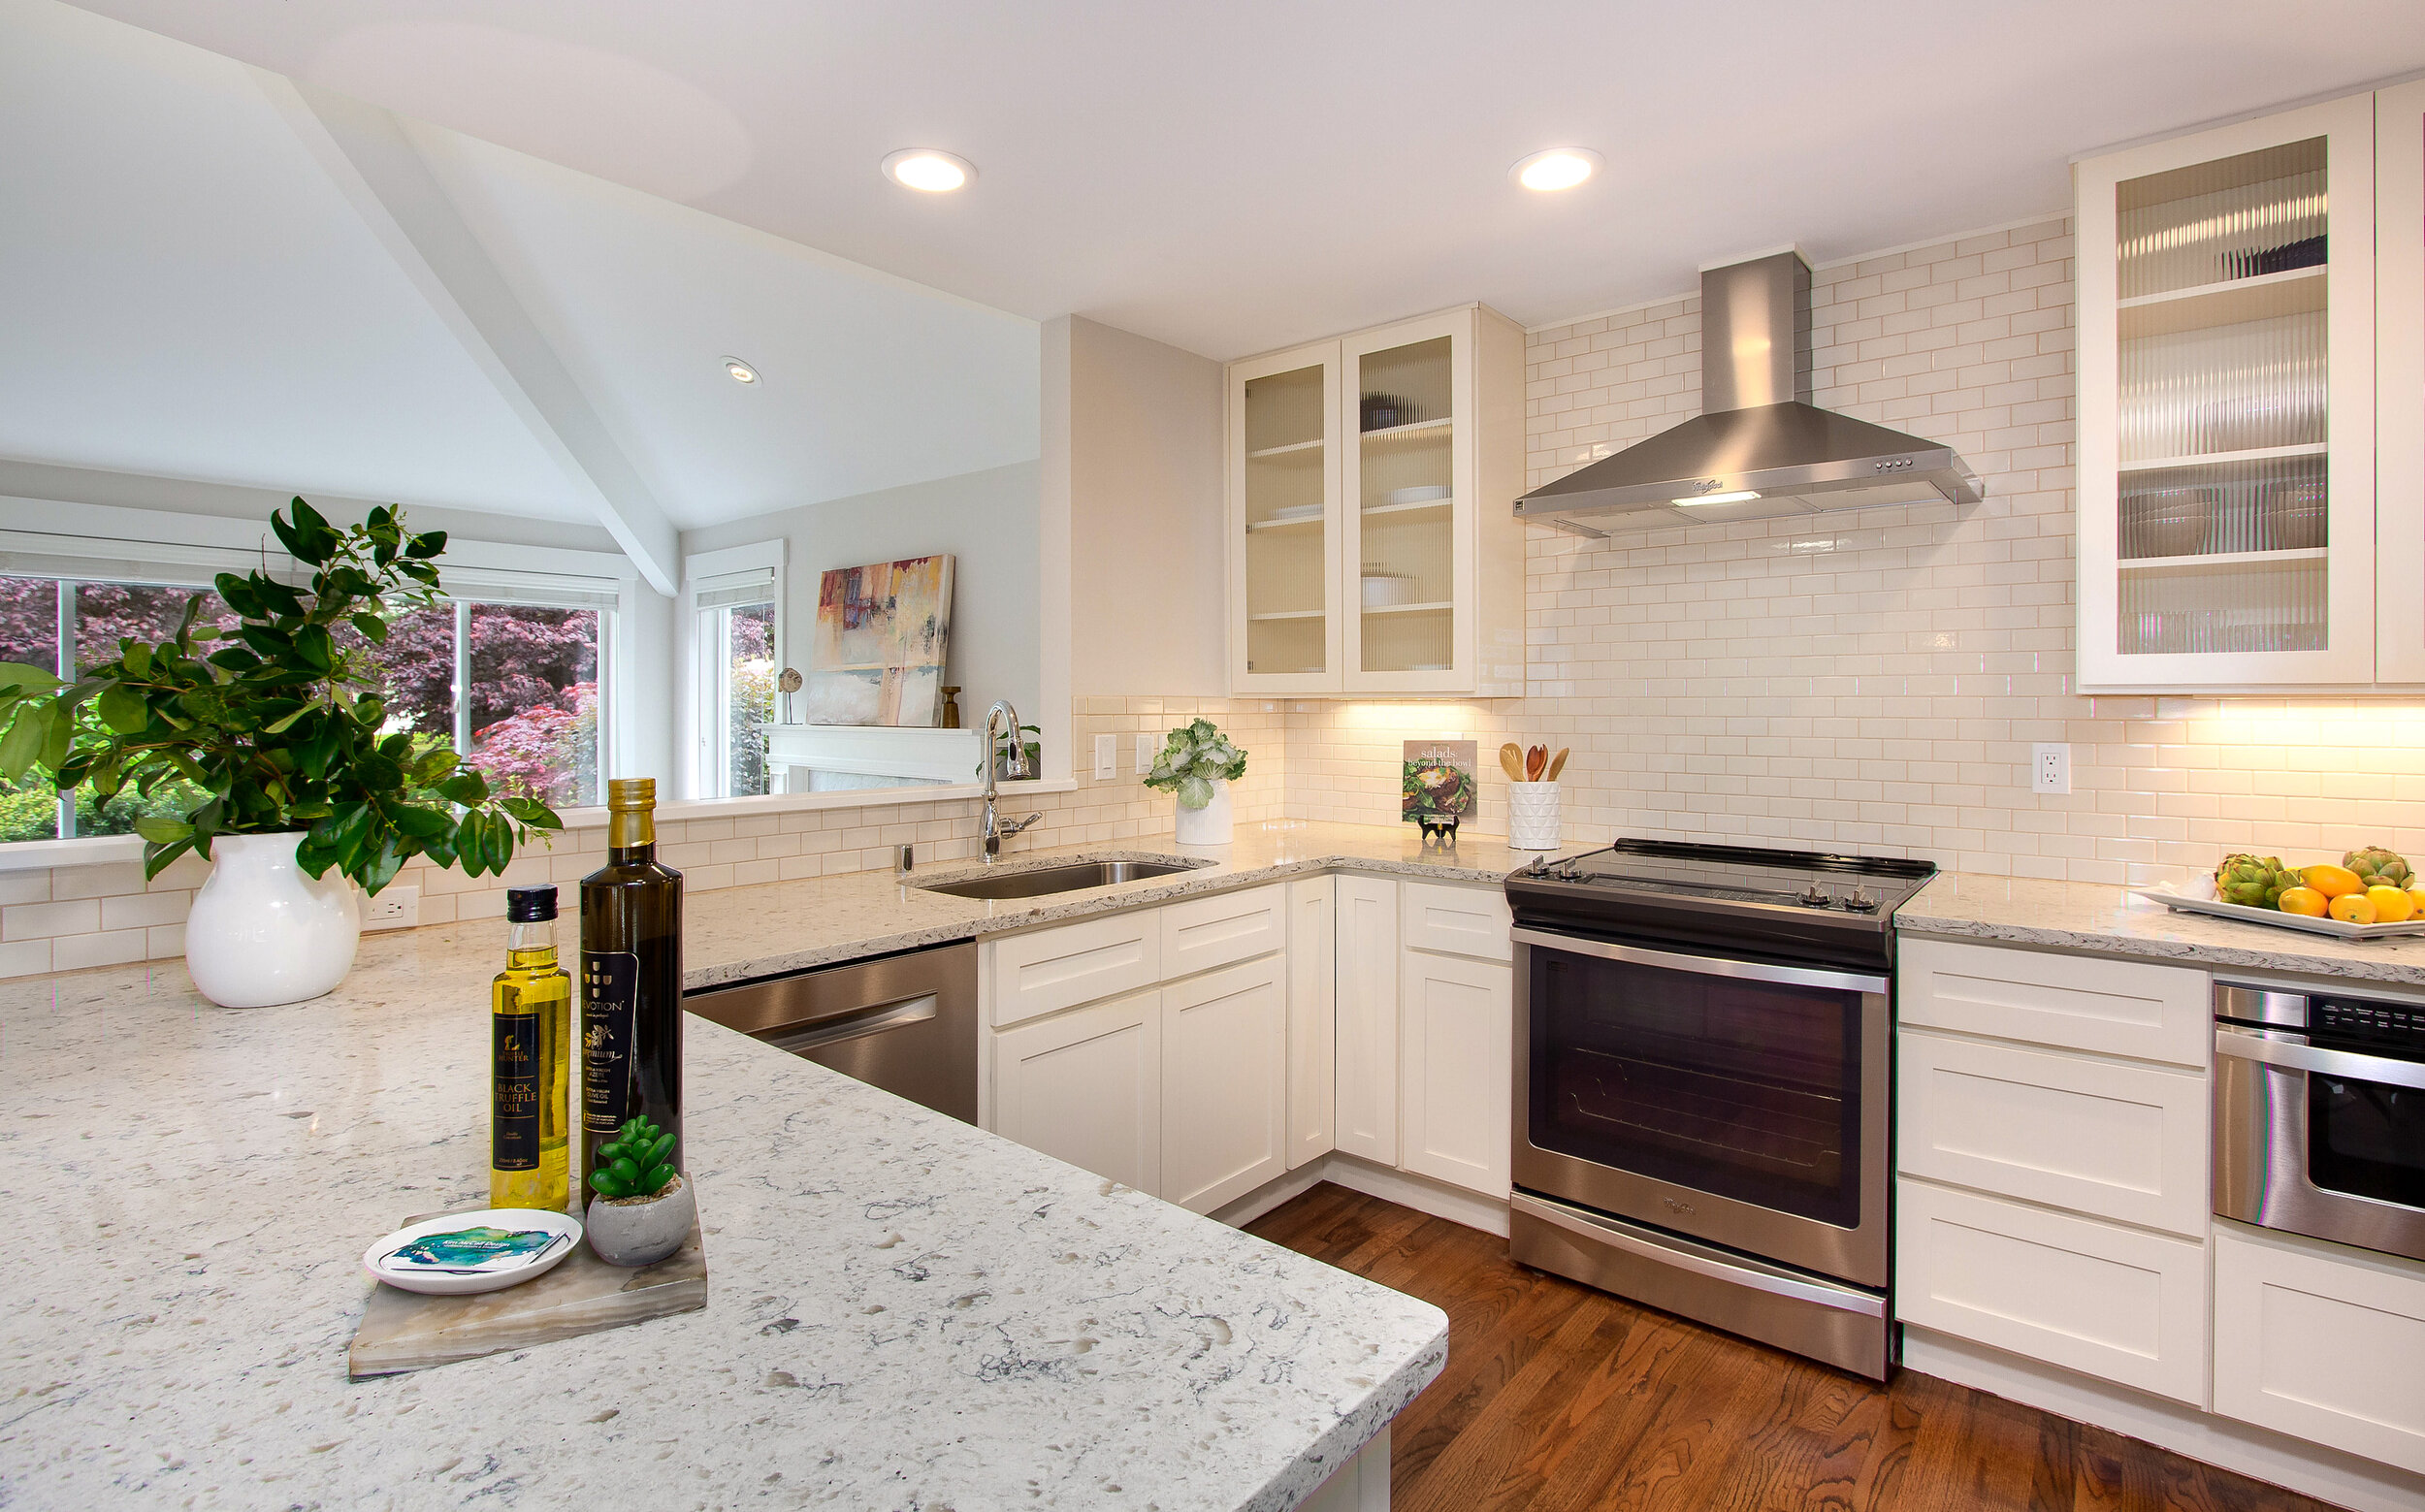  Enjoy this stunning kitchen, complete with beautiful white stone counters and updated stainless steel appliances, as you whip up a meal.&nbsp; 